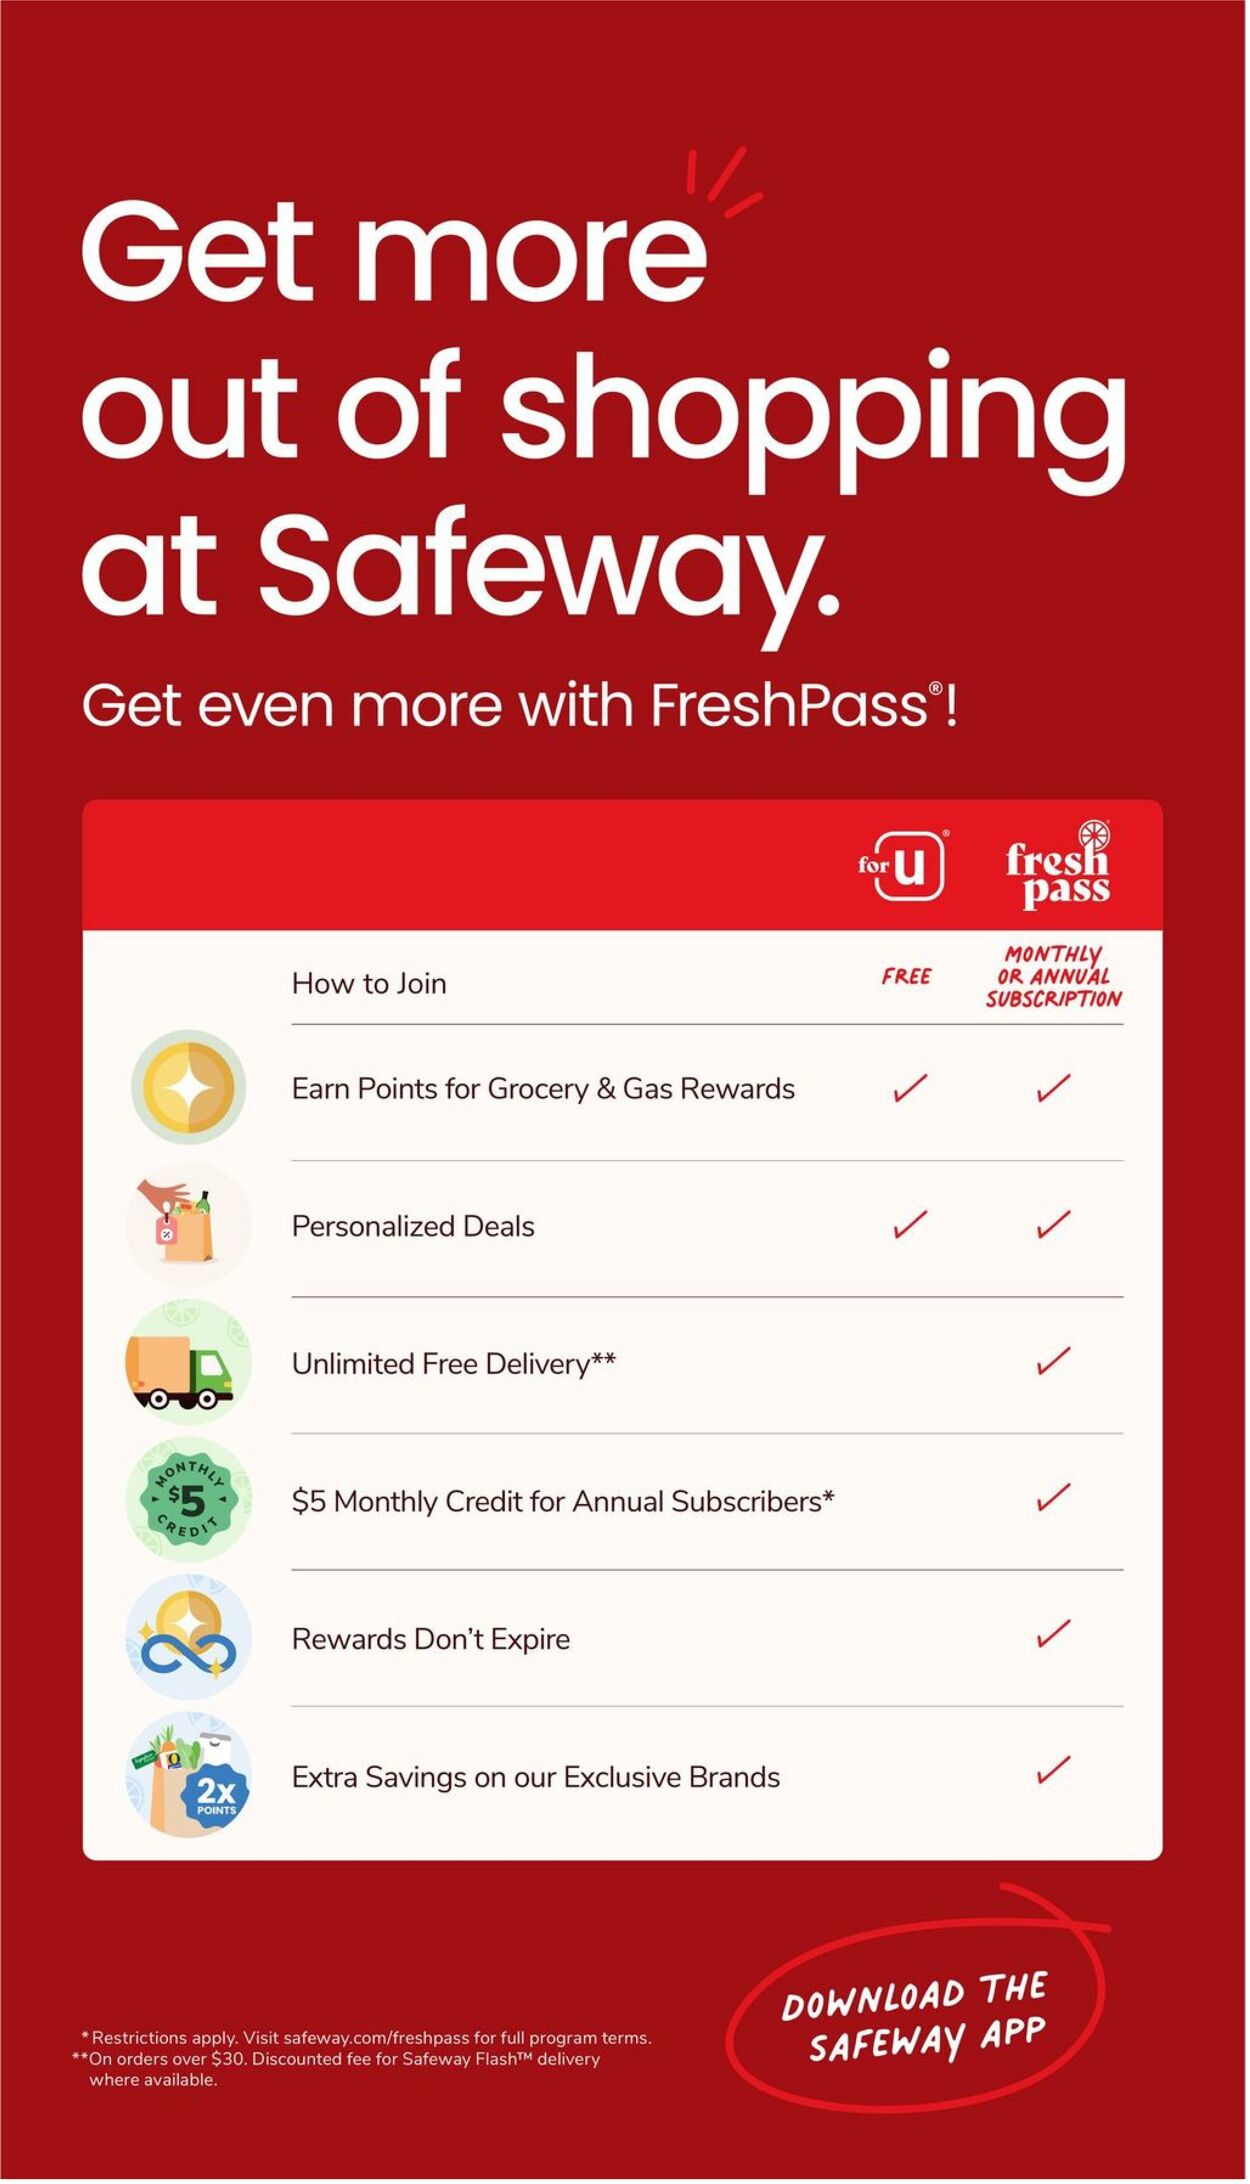 Safeway Ad from 01/24/2024